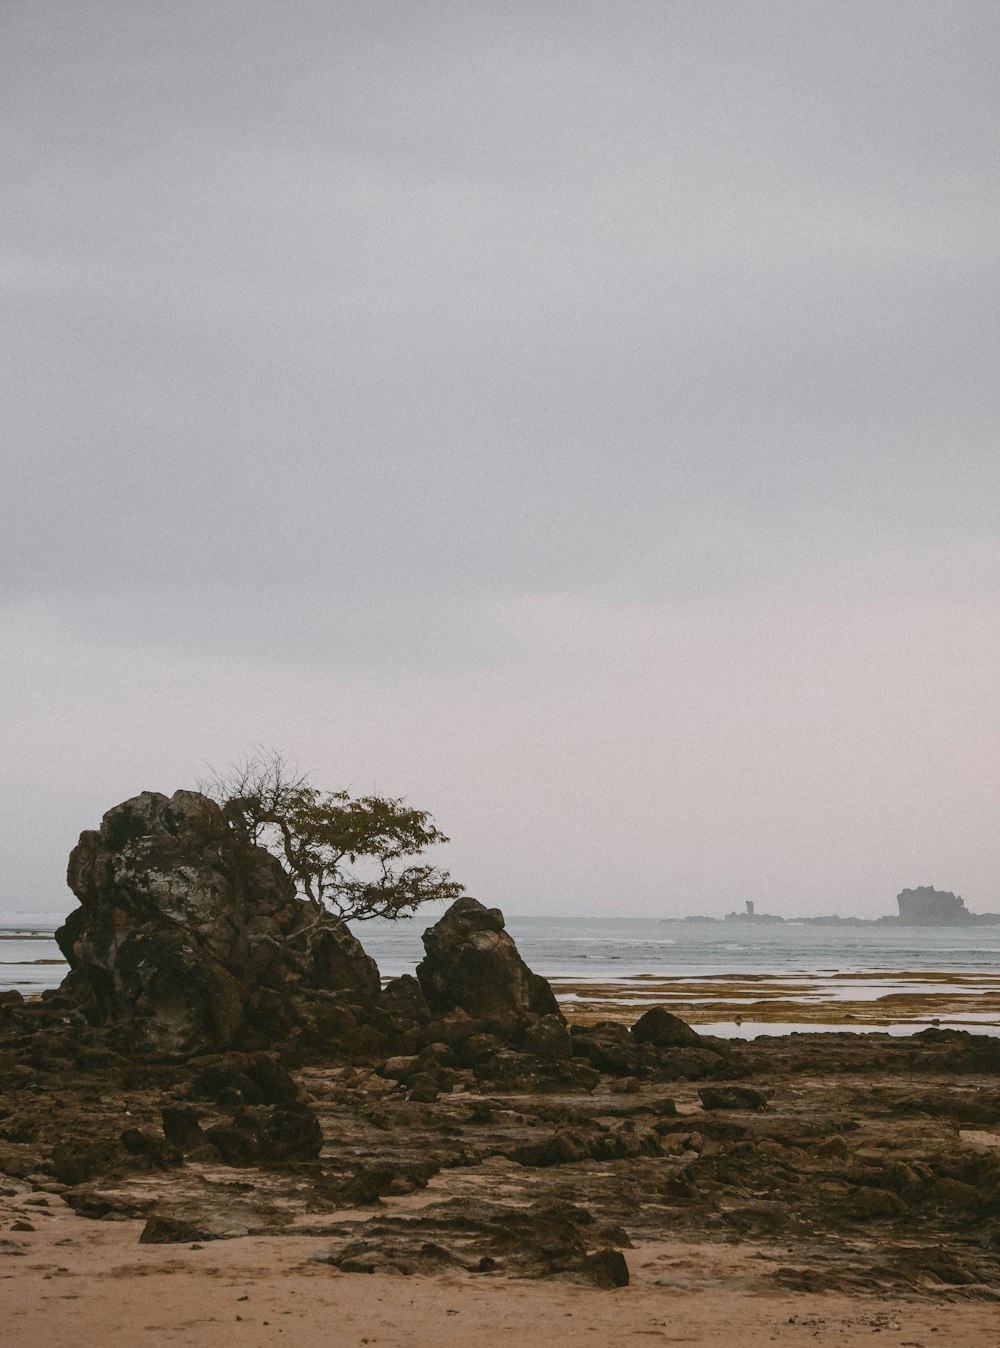 a lone tree sitting on top of a rocky beach